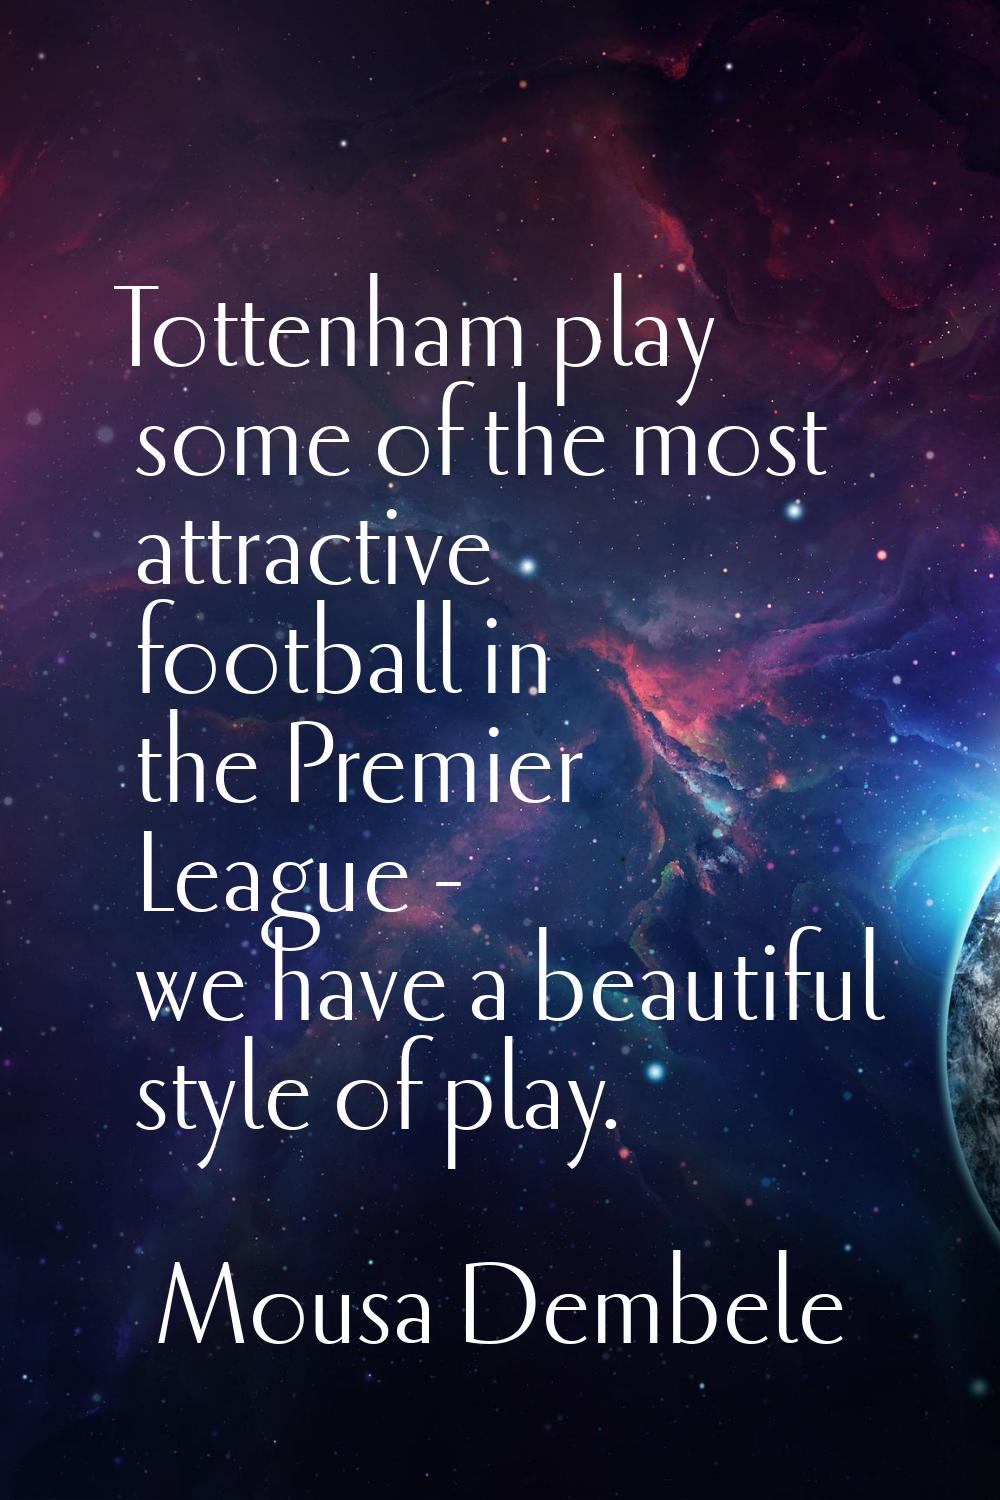 Tottenham play some of the most attractive football in the Premier League - we have a beautiful sty